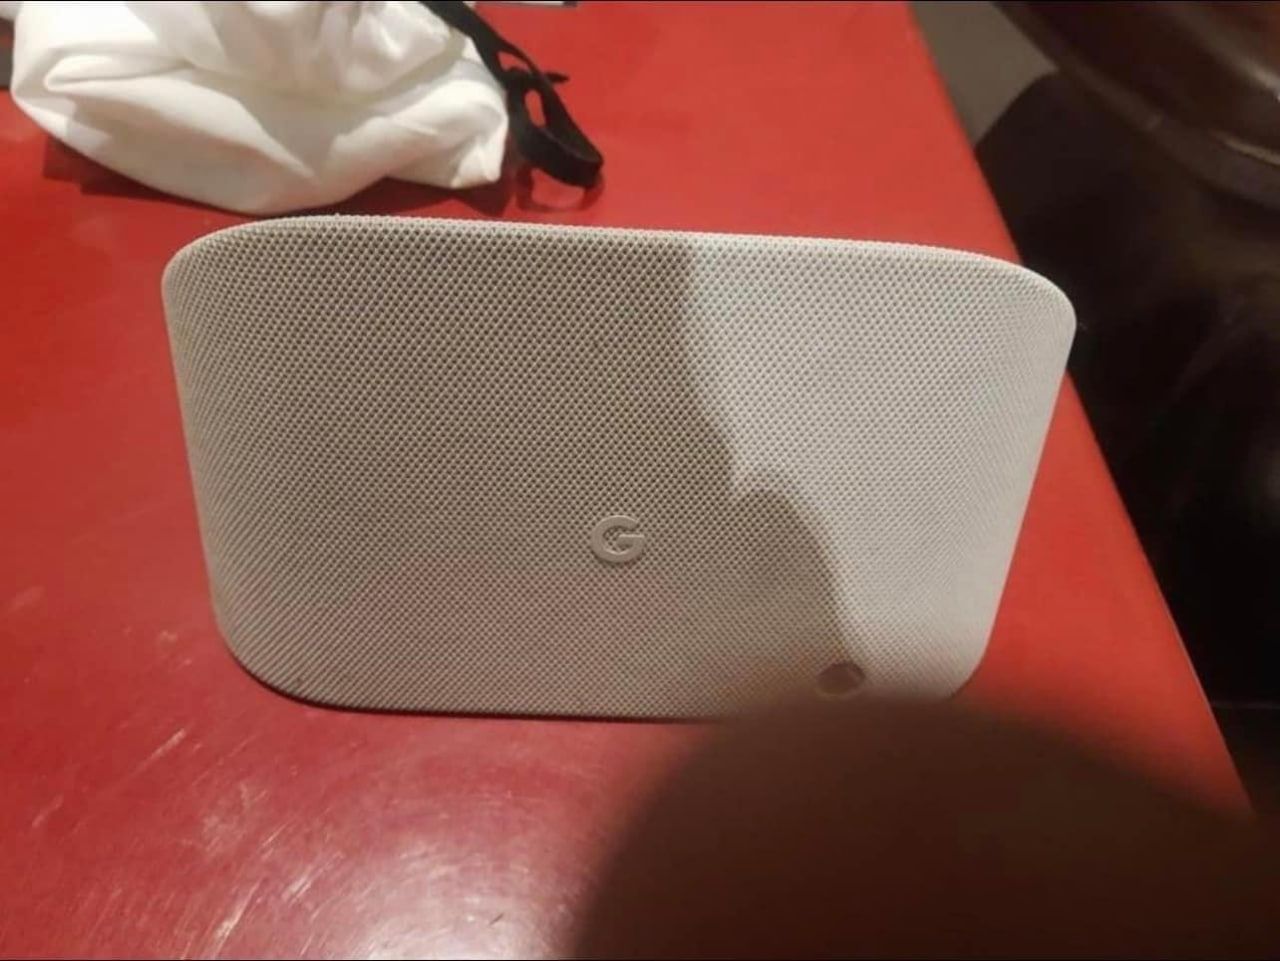 A leaked image reportedly of the Google Pixel Tablet dock. The dock is covered in light fabric and sits on a red table